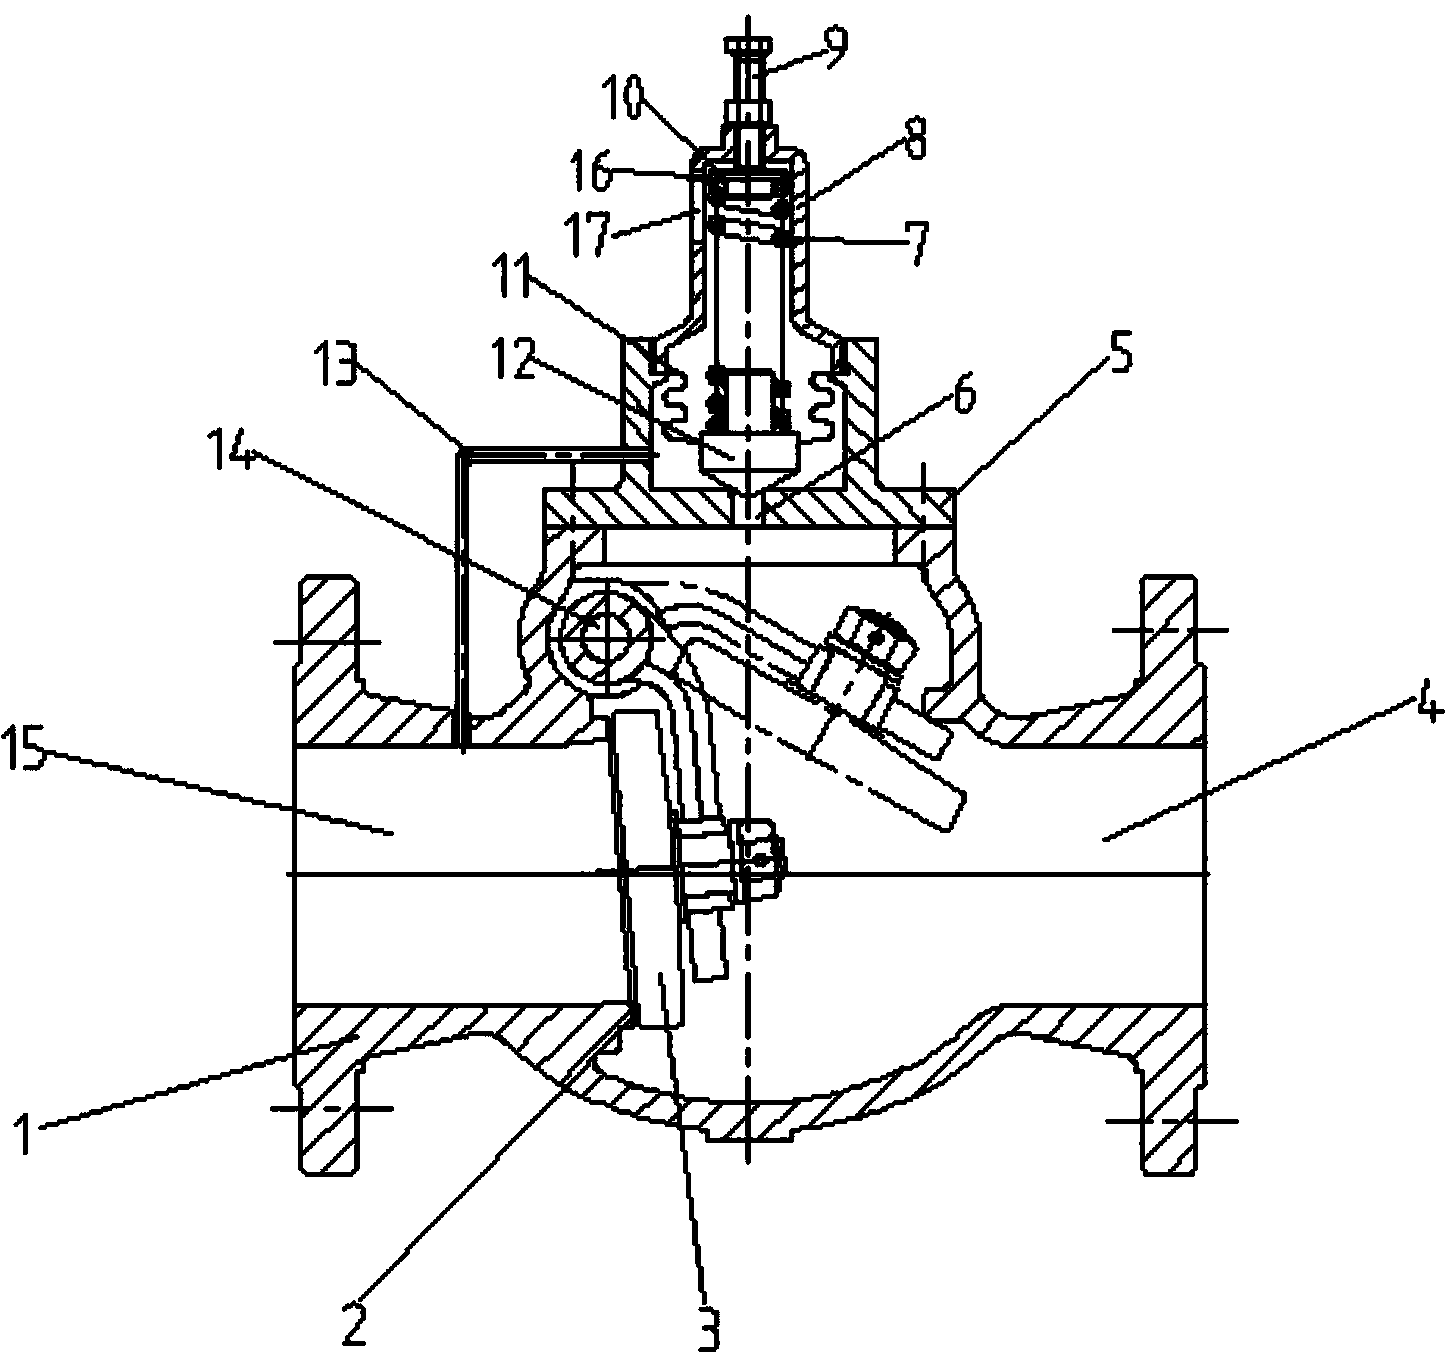 Screwing opening type check valve capable of balancing pressure automatically